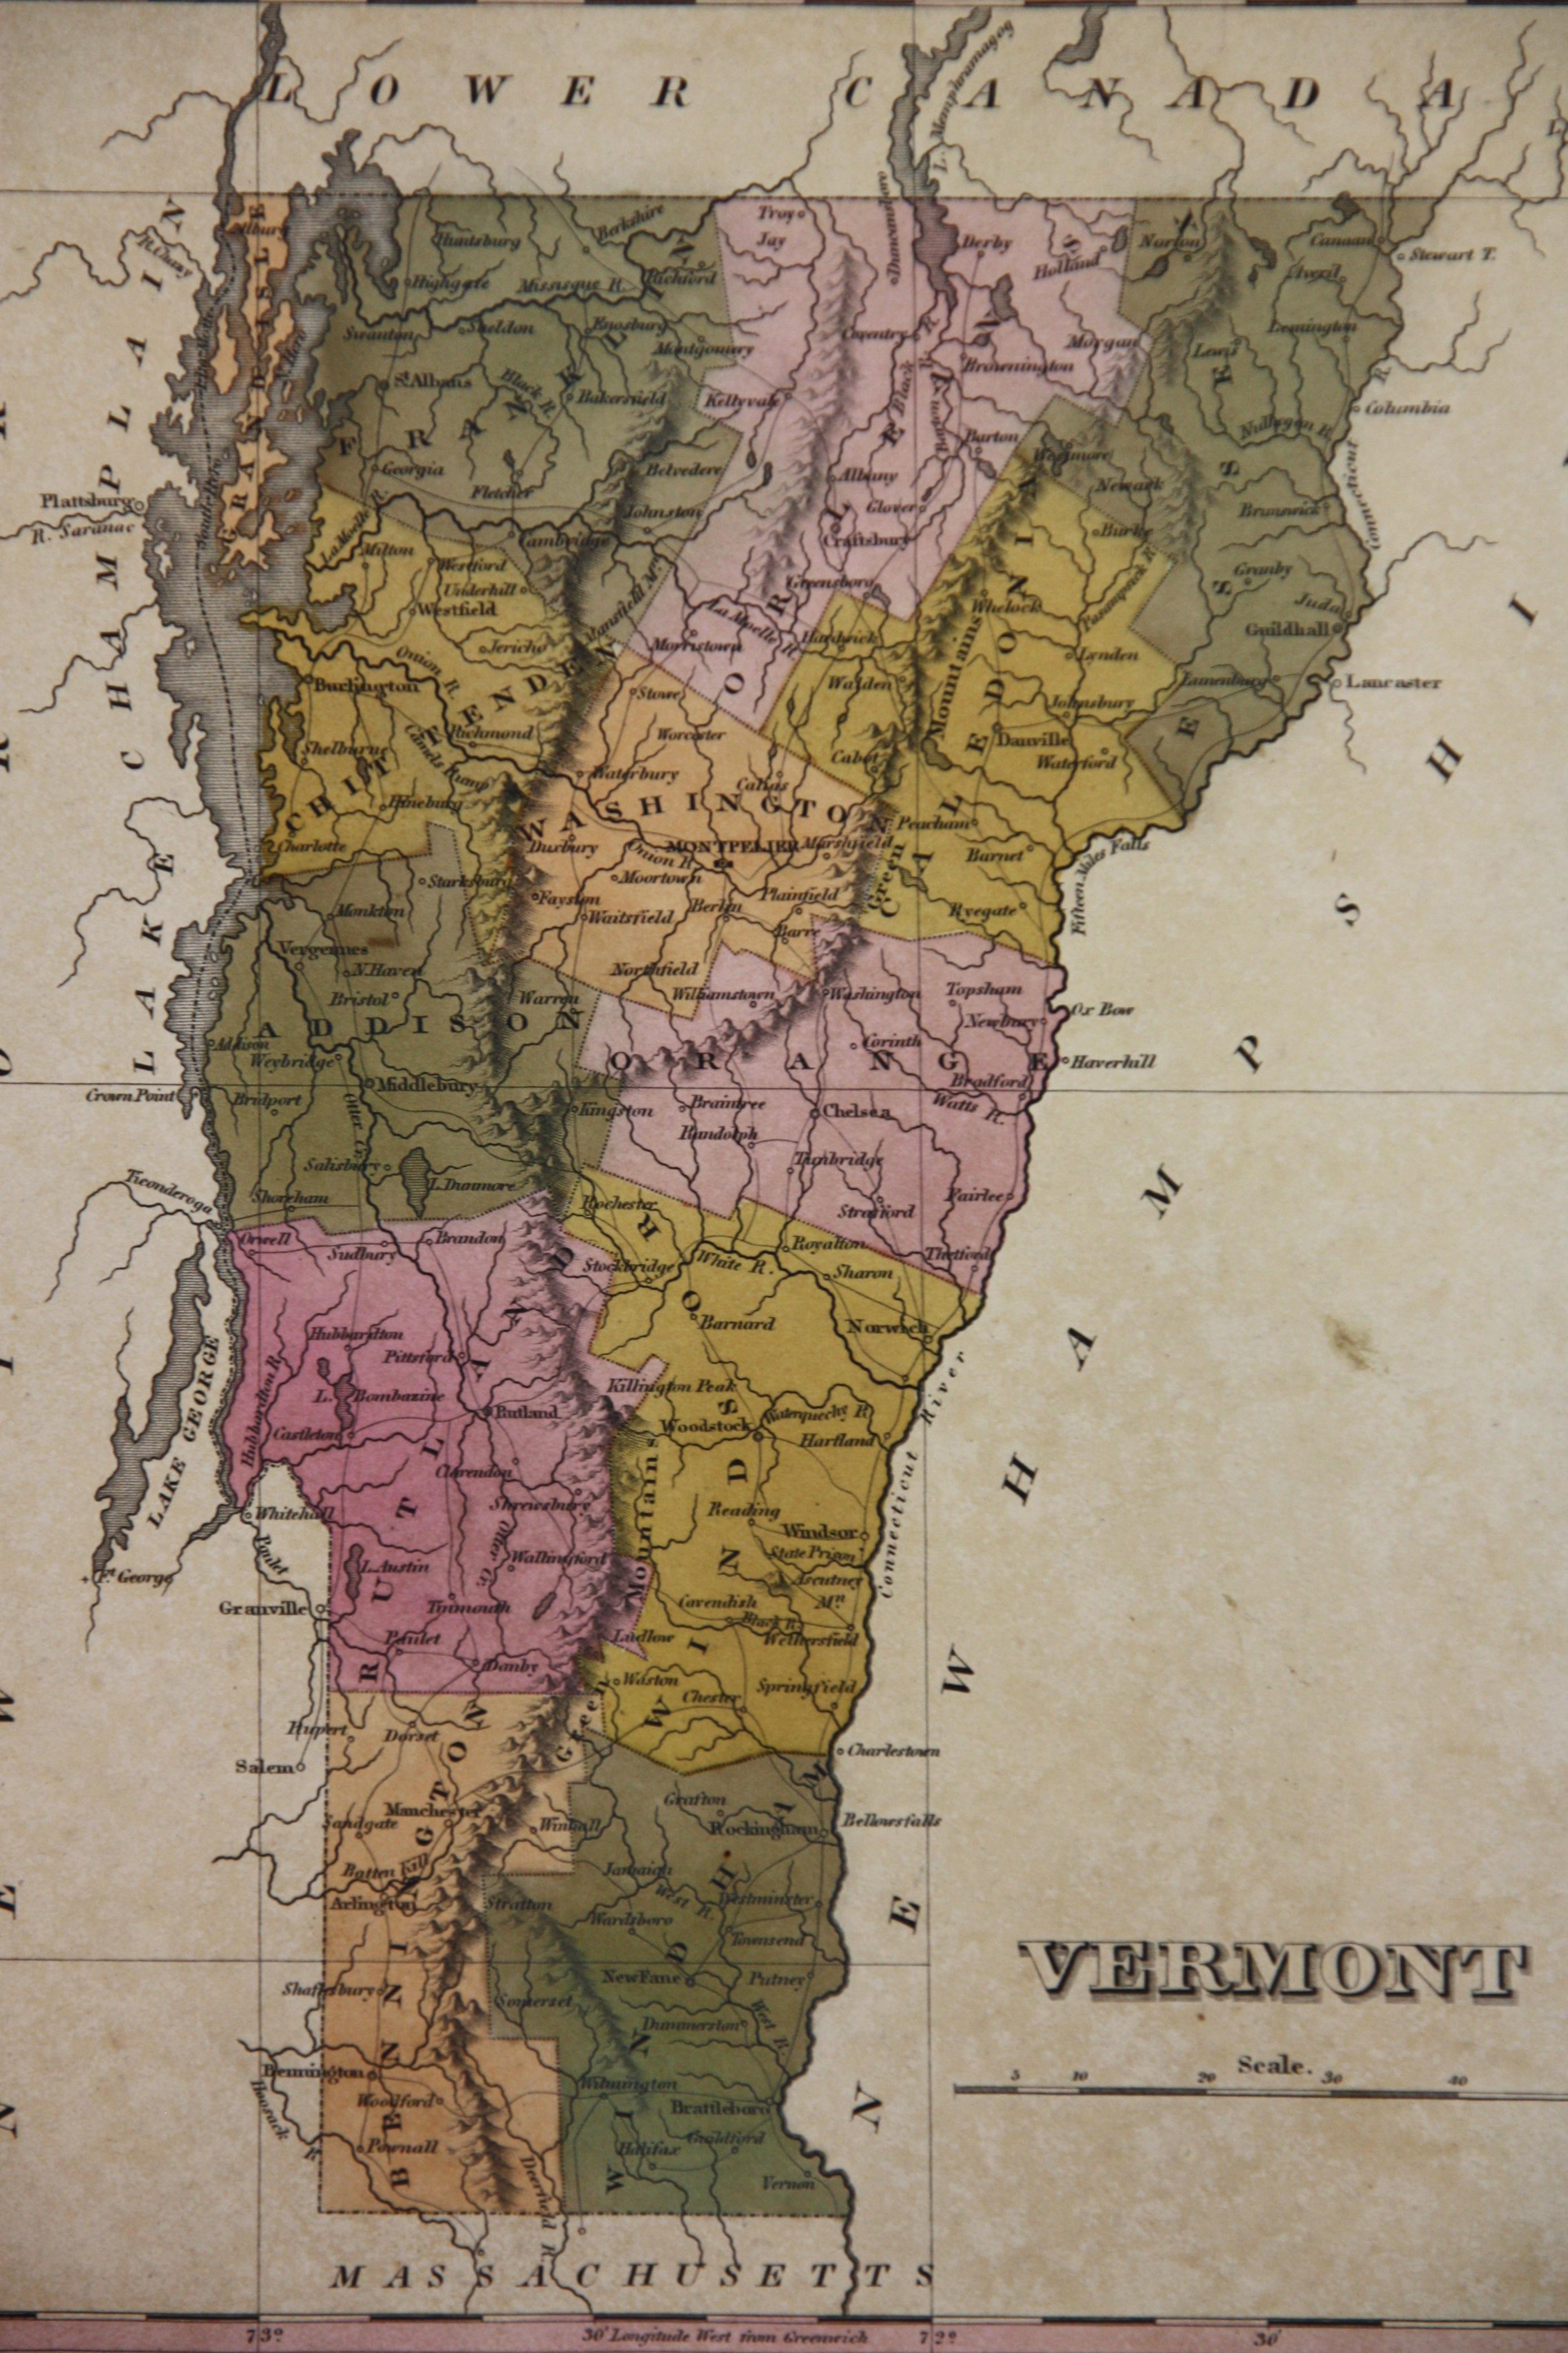 In the 1820's, Anthony Finley produced a series of fine atlases in the then leading American cartographic center, Philadelphia. Finley's work is a good example of the quality that American publishers were beginning to obtain. Each map is elegantly